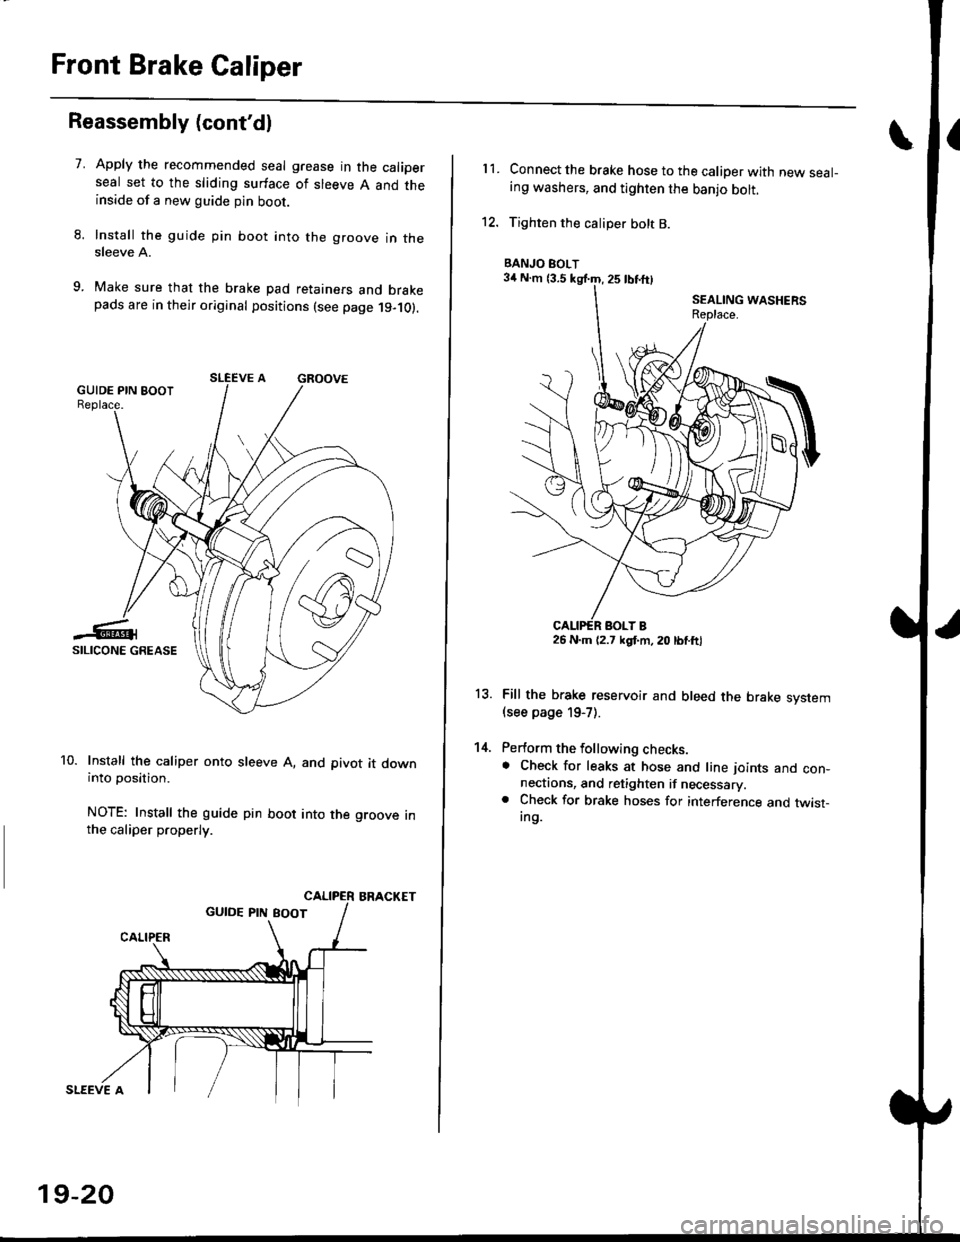 HONDA CIVIC 1999 6.G User Guide Front Brake Caliper
Reassembly (contdl
7.Apply the recommended seal grease in the caliperseal set to the sliding surface of sleeve A and theinside of a new guide pin boot.
Install the guide pin boot 